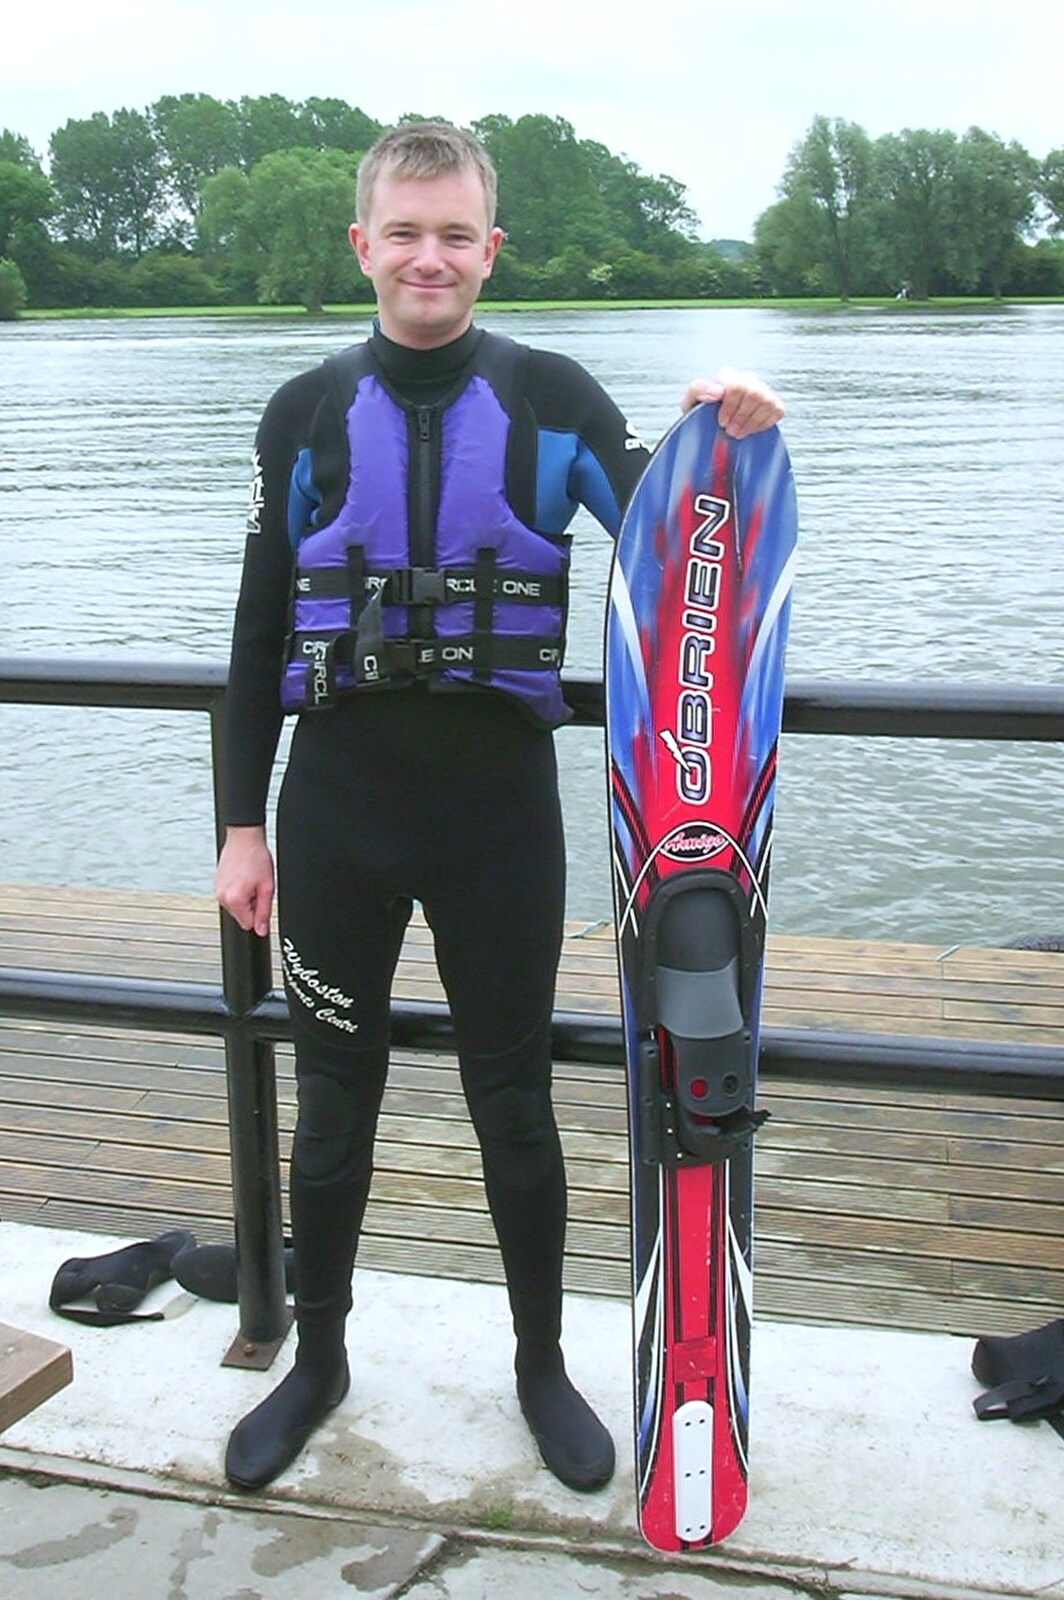 3G Lab Watersports Fun Day, Wyboston, Bedfordshire - 8th June 2002: Nosher and a water ski